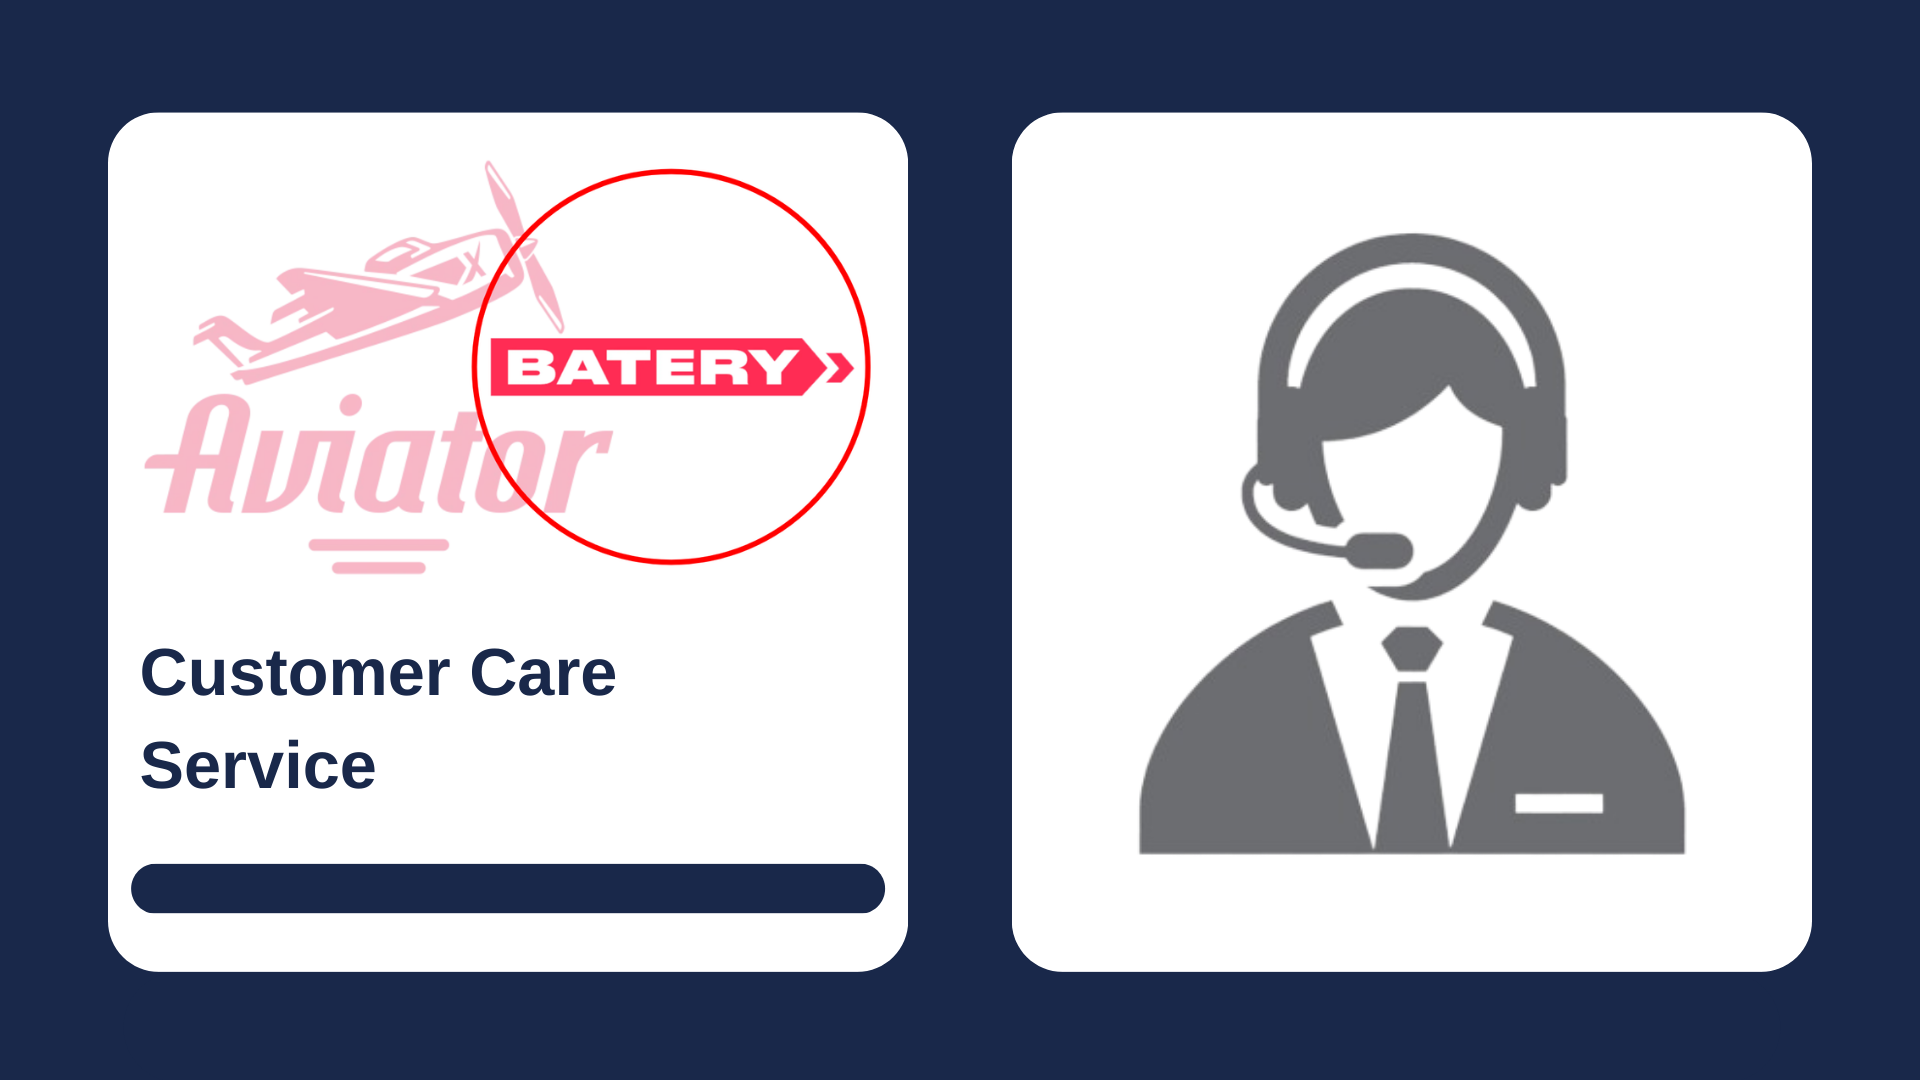 First picture showing Aviator and Batery logos, and second - man with headset